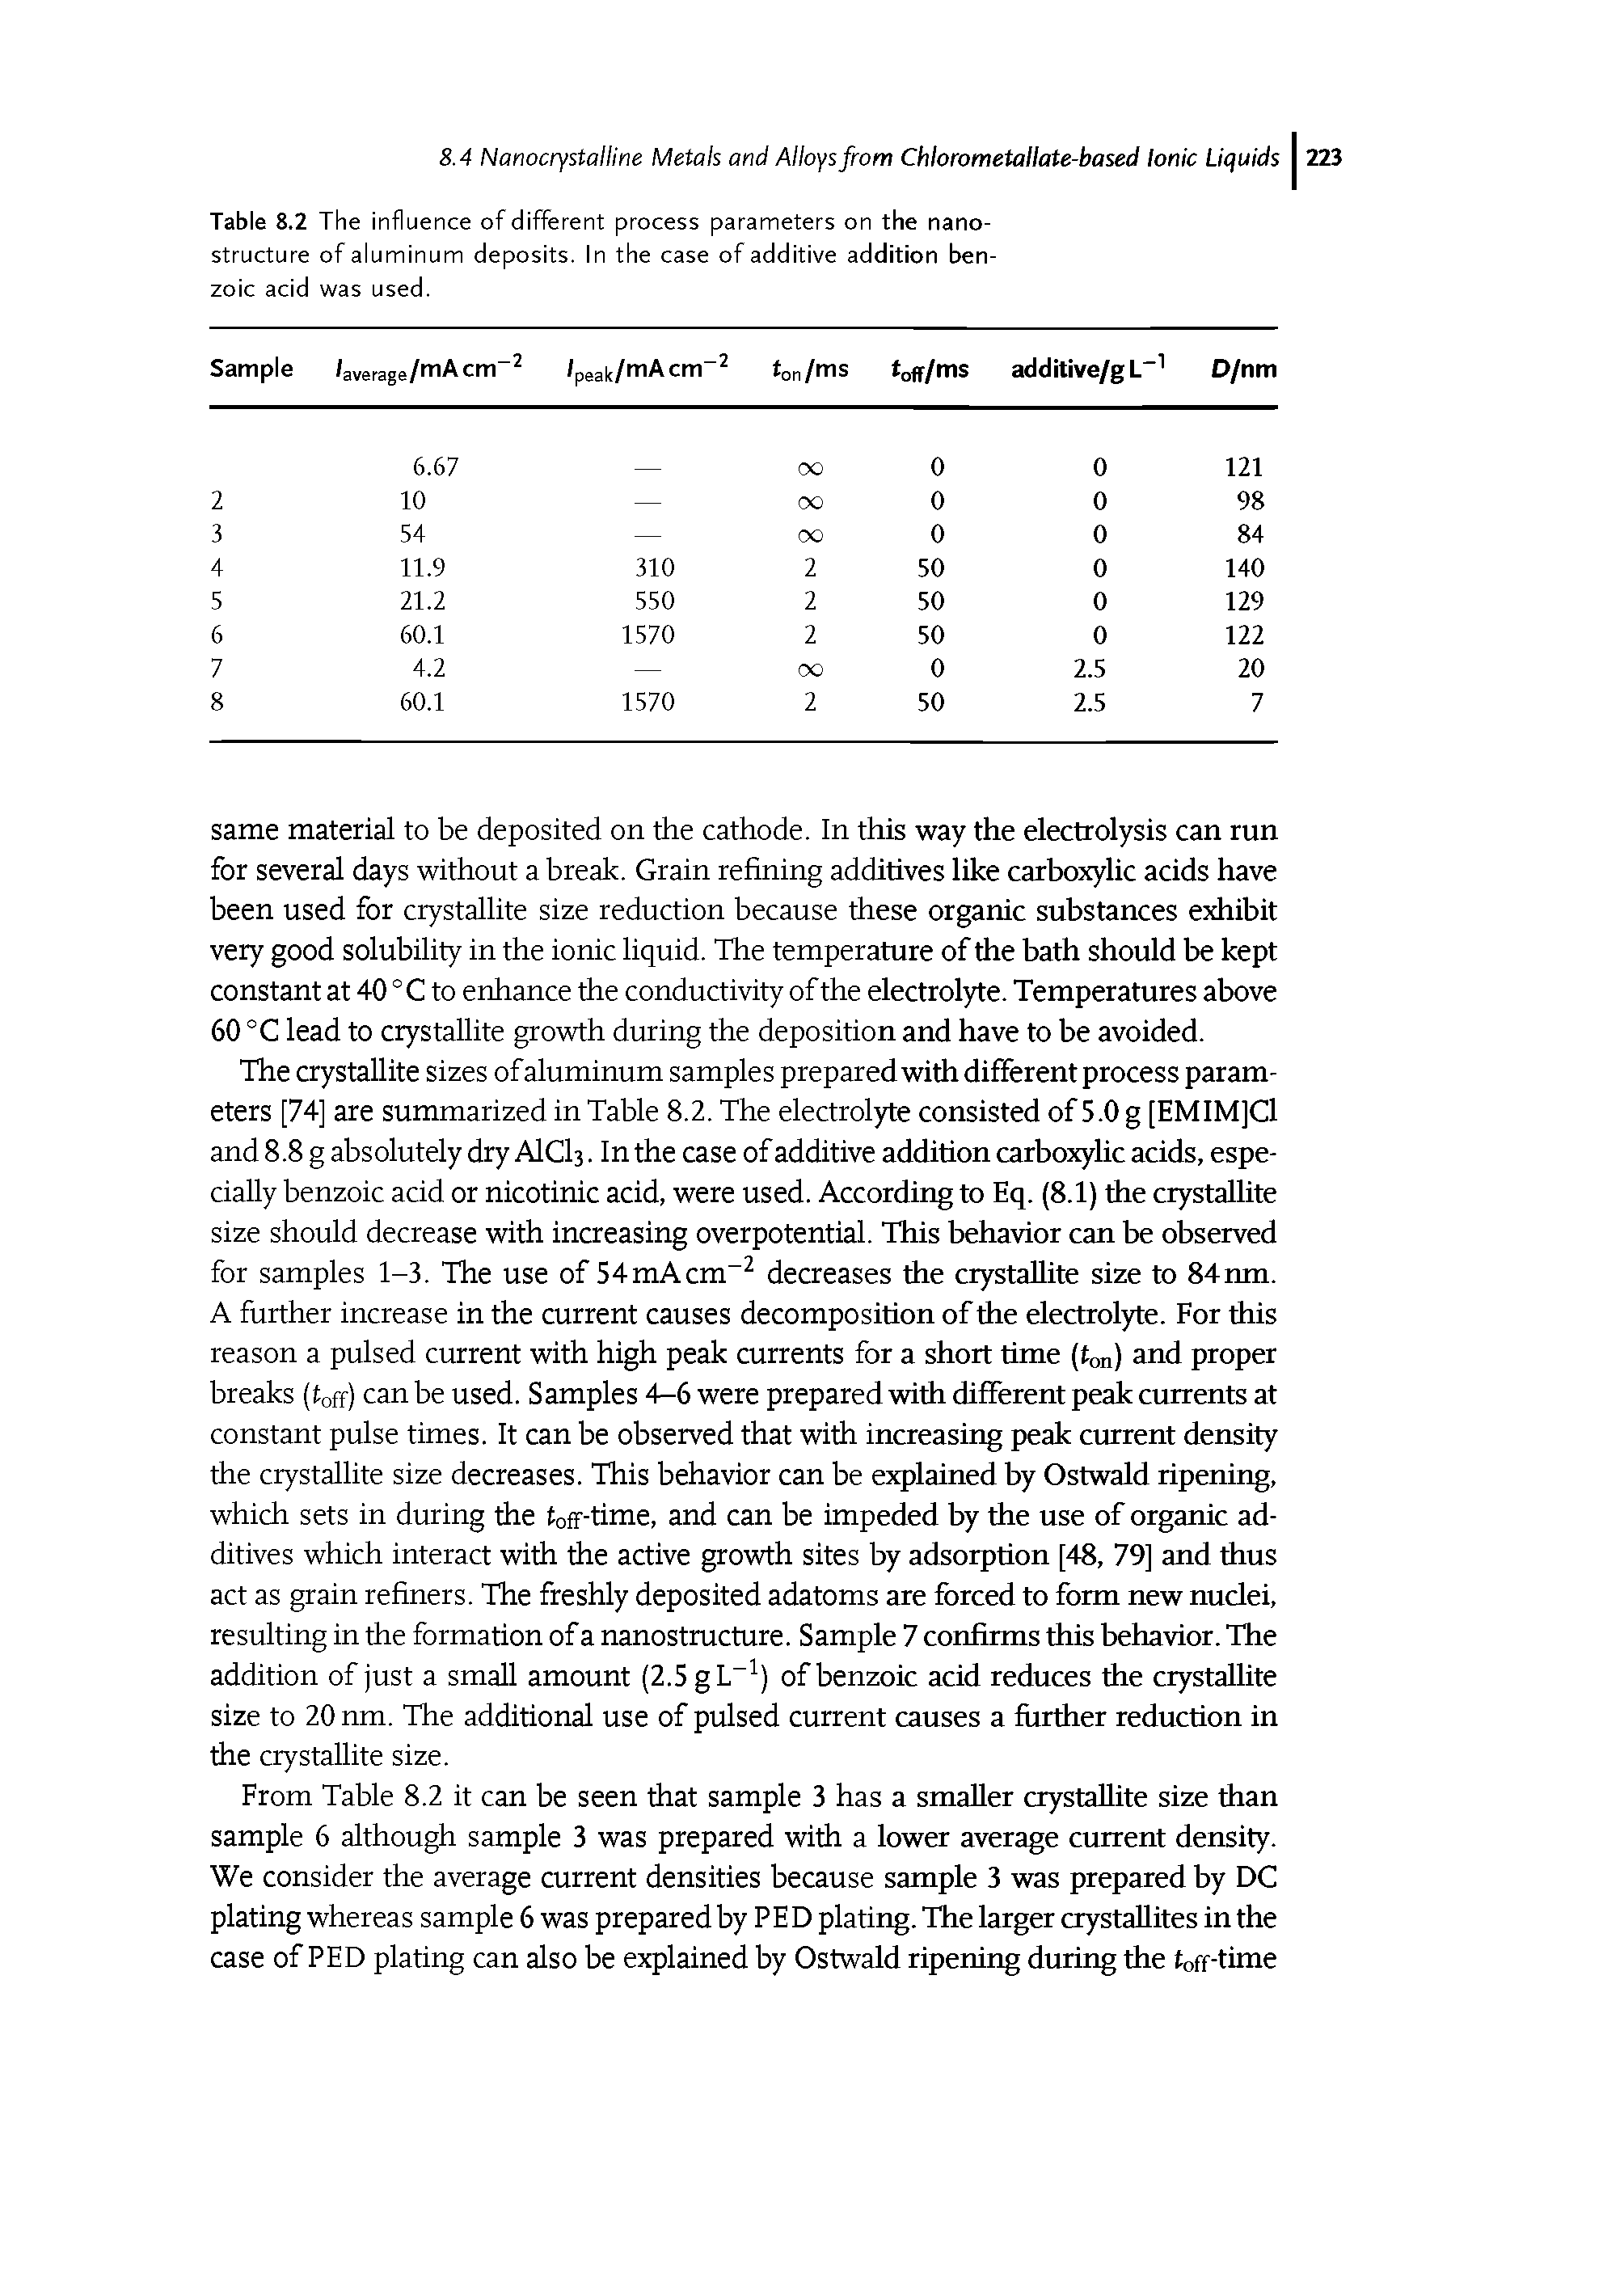 Table 8.2 The influence of different process parameters on the nanostructure of aluminum deposits. In the case of additive addition benzoic acid was used.